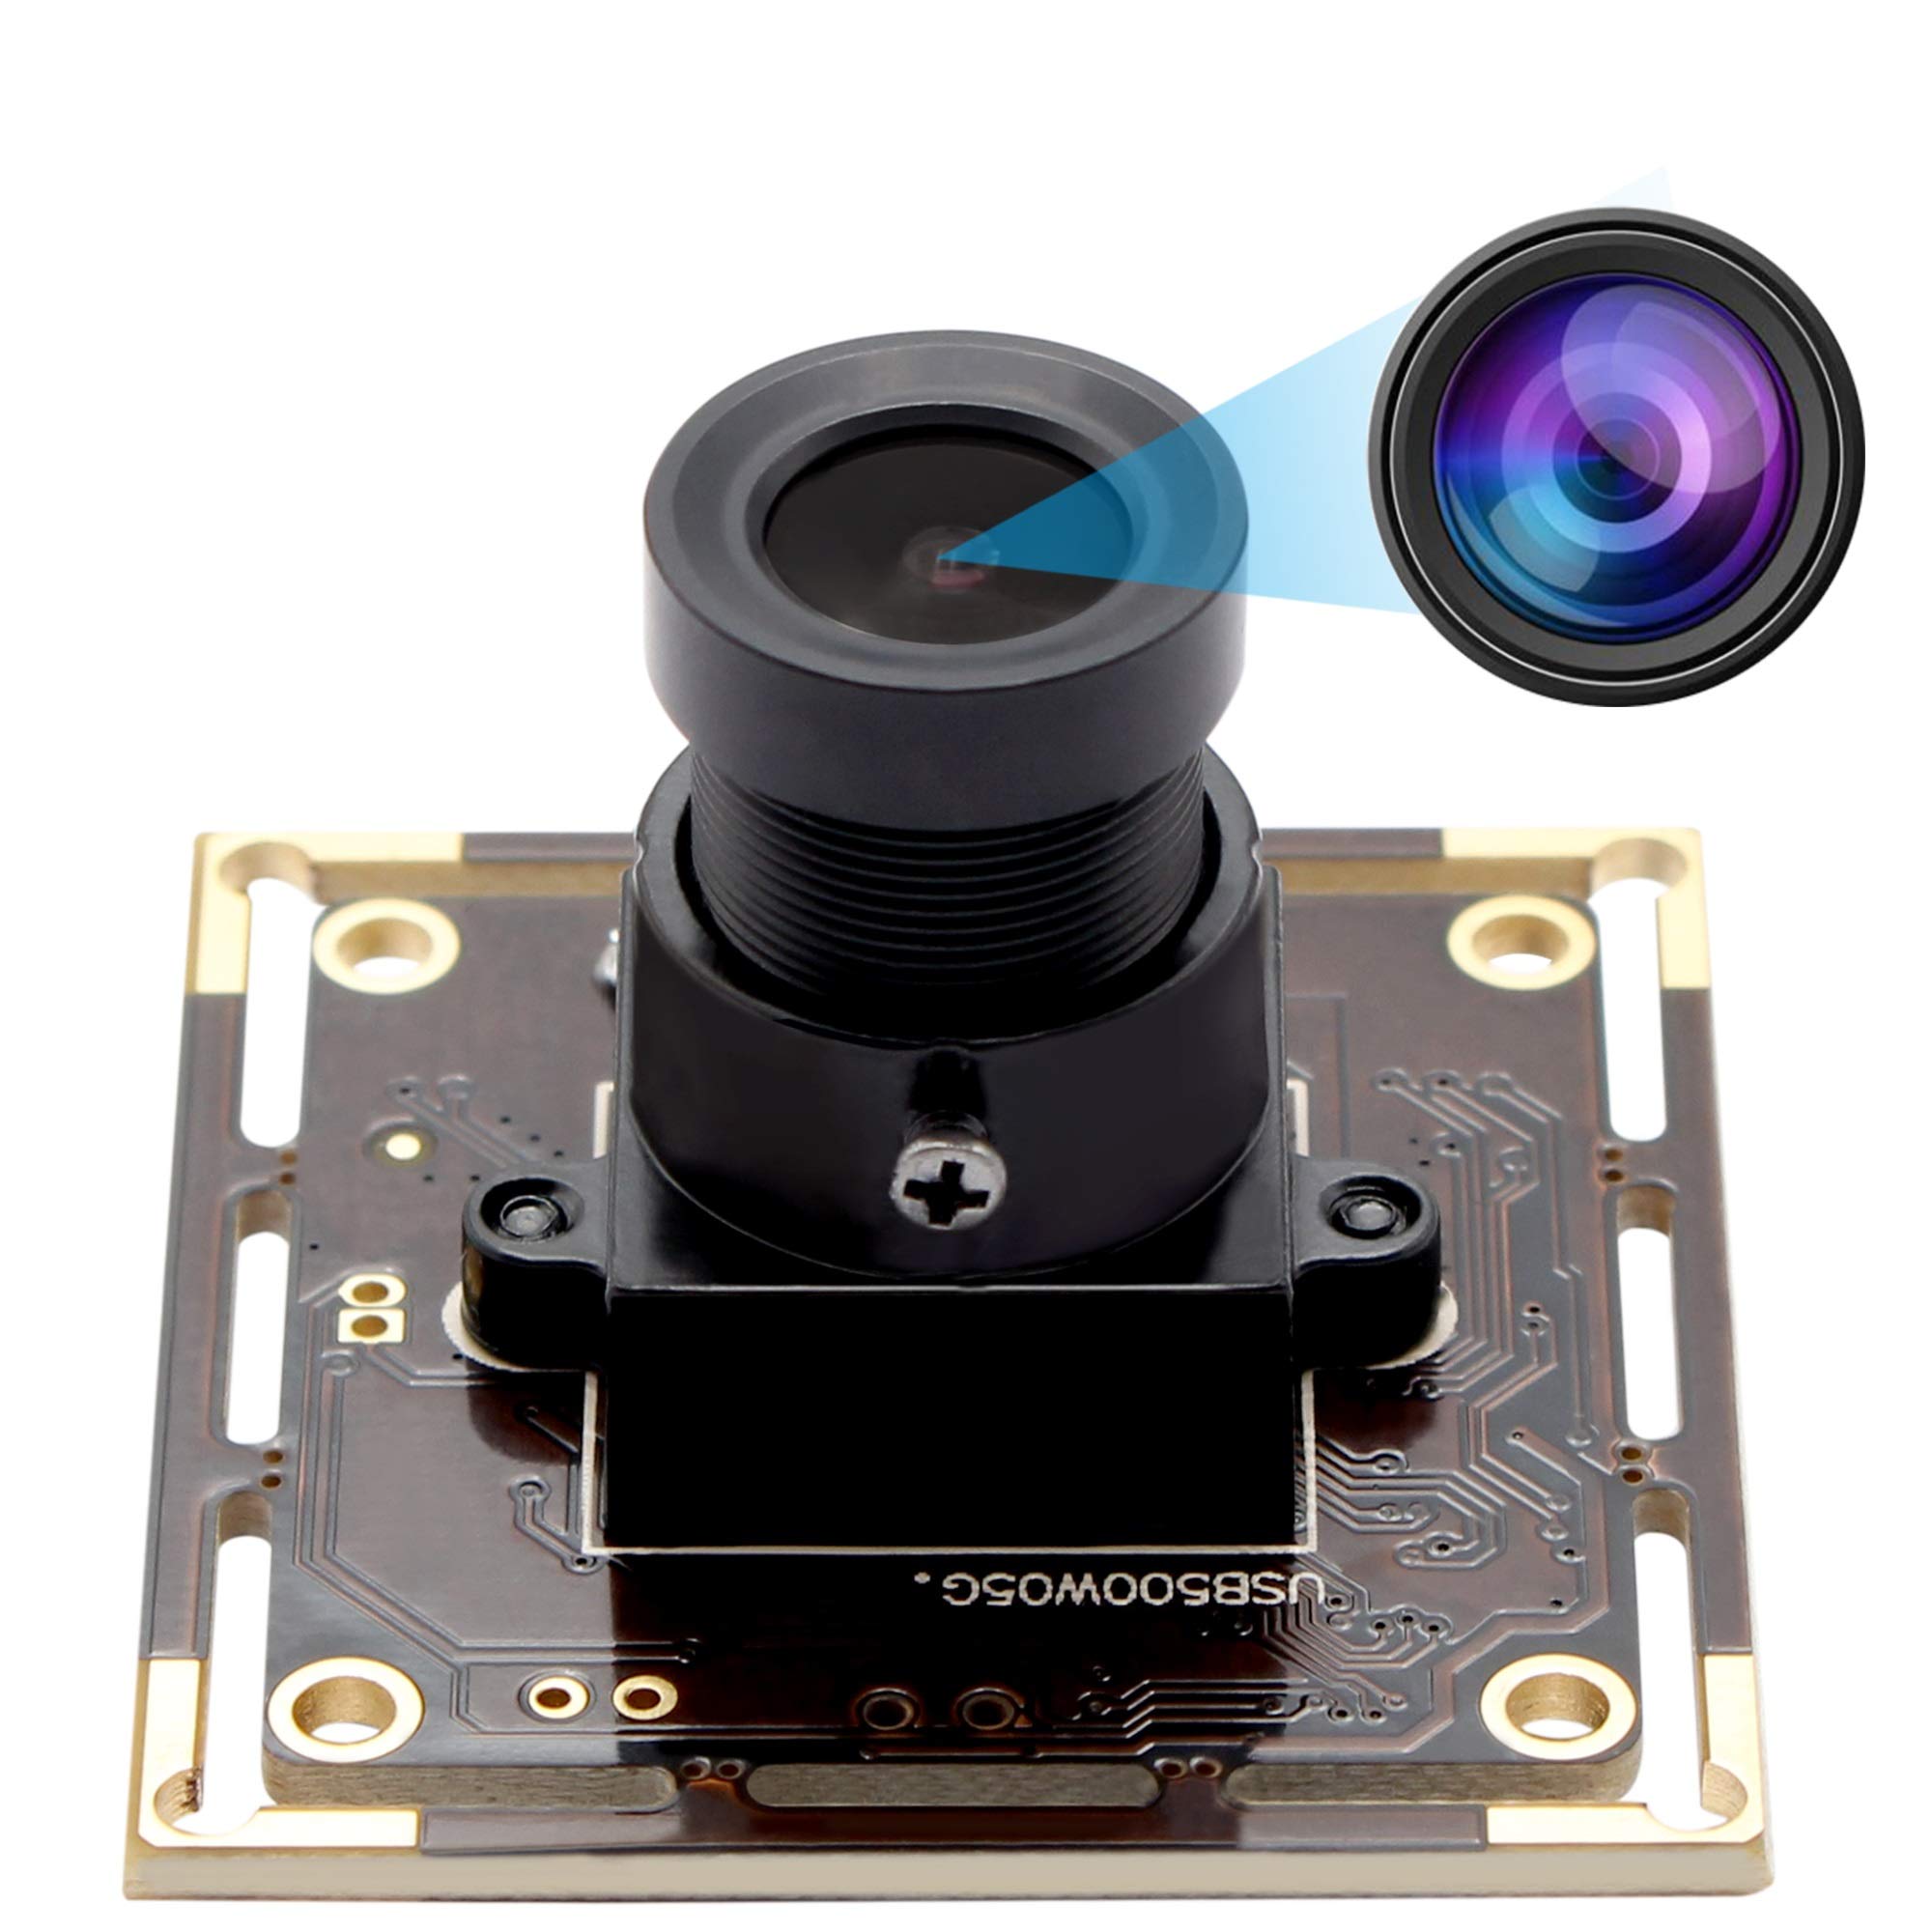 Camera USB 5 Megapixel 2592X1944 Webcamera with Aptina Sensor High Difinition Webcam for Industrial, Machine Vision,Correctable,USB2.0 with Camera ...